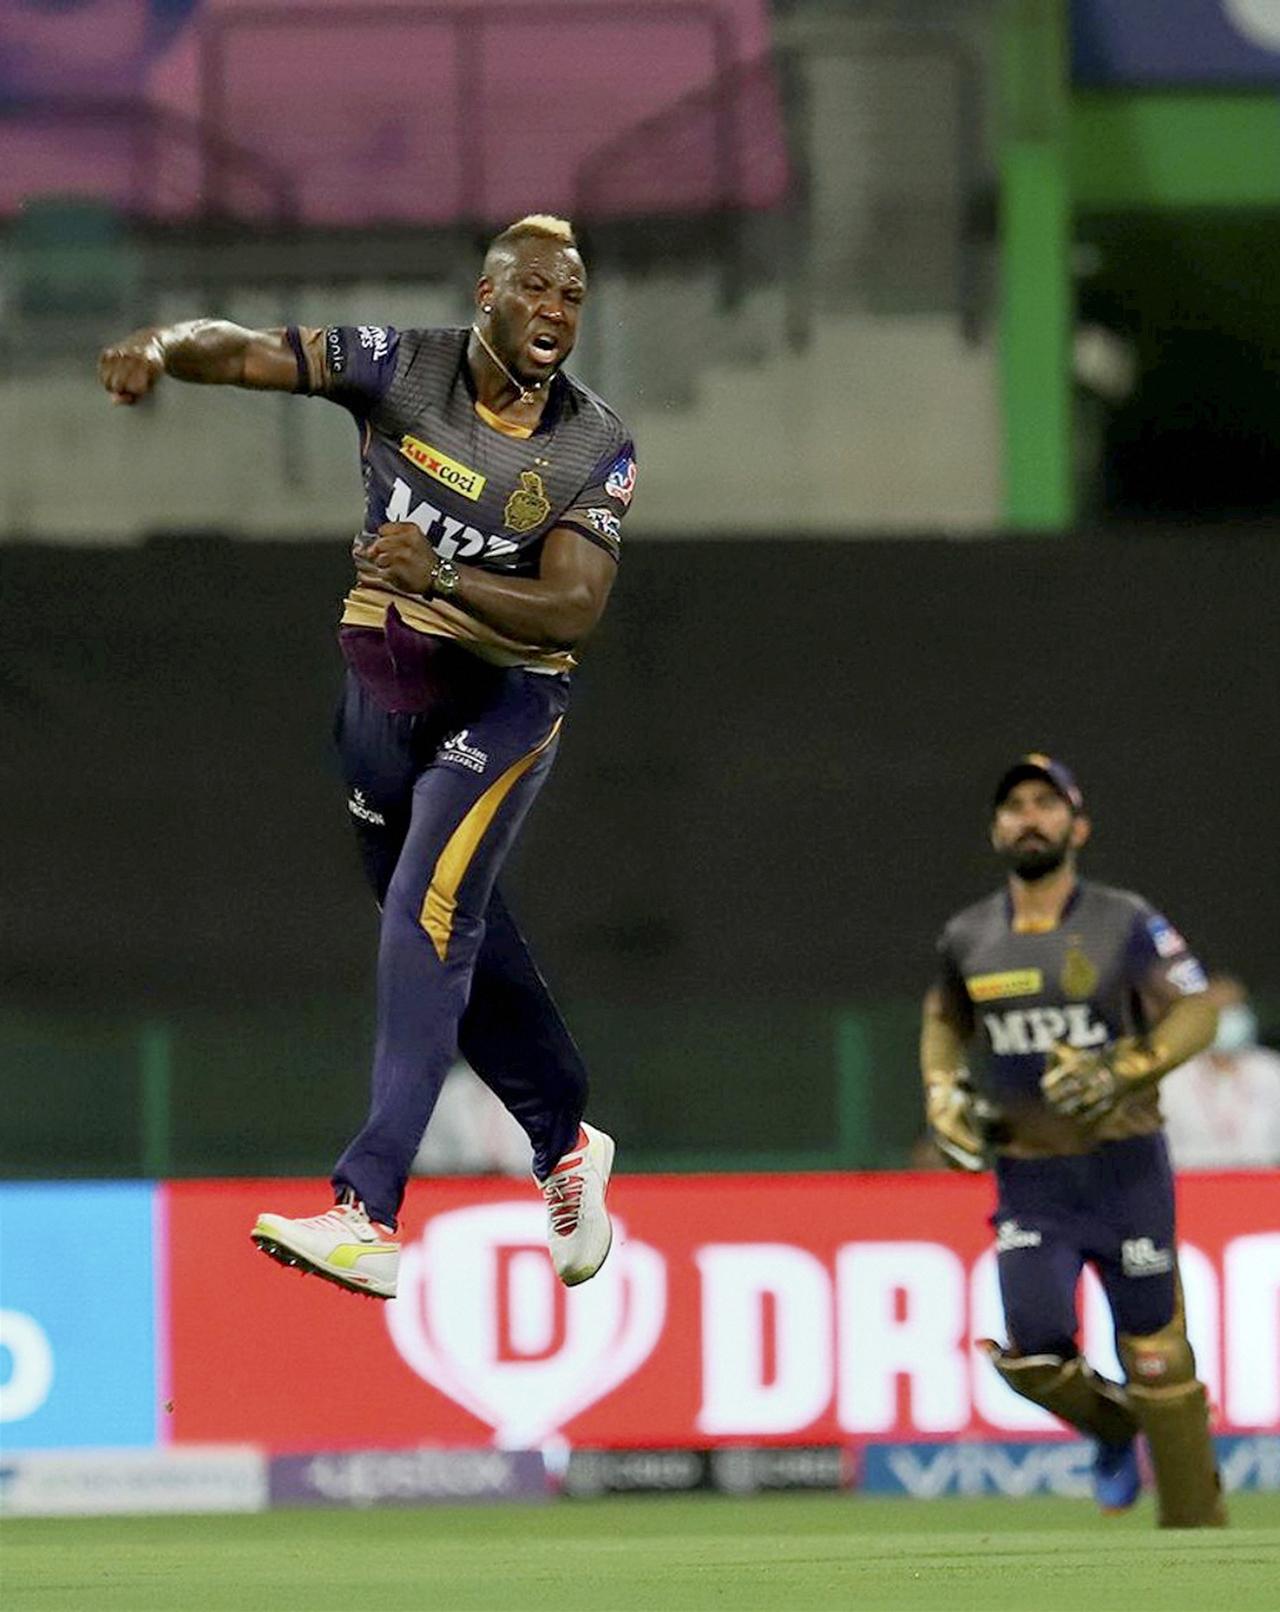 Andre Russell of Kolkata Knight Riders celebrates the wicket of AB de Villiers of Royal Challengers Bangalore during match 31 of the Vivo Indian Premier League between the Kolkata Knight Riders and the Royal Challengers Bangalore. Pic/ PTI